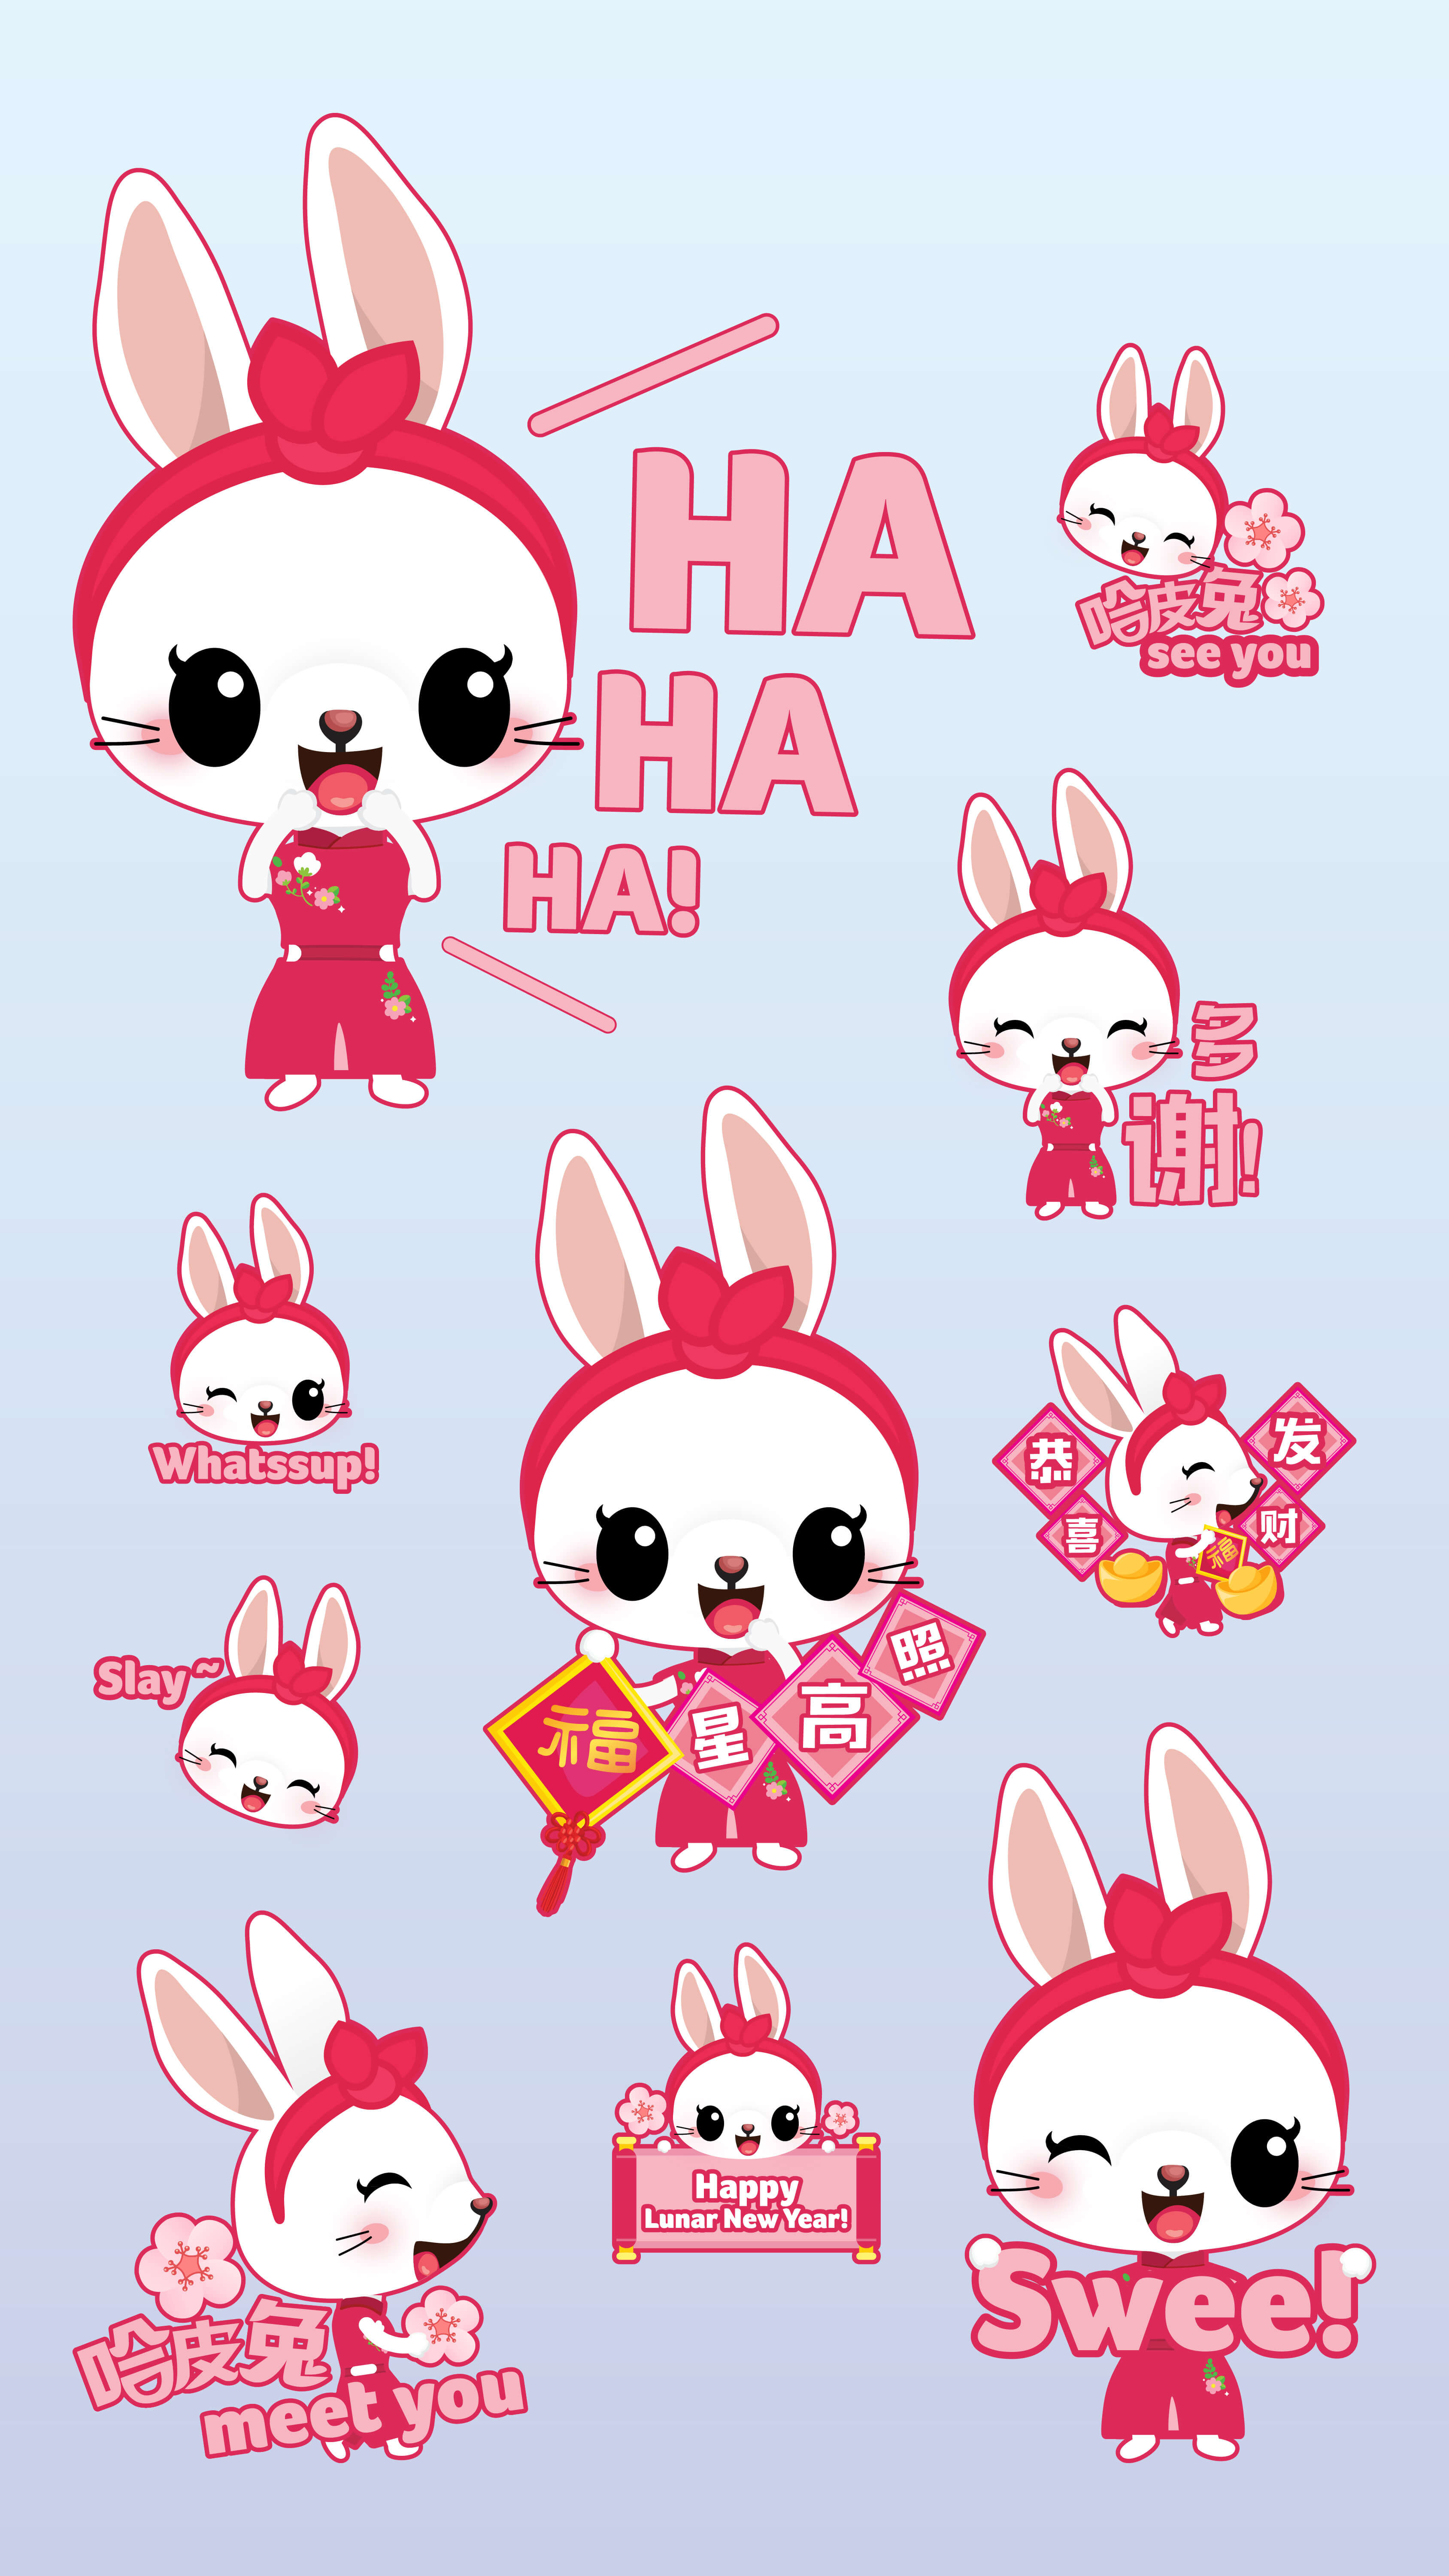 Chinese New Year Stickers on the App Store